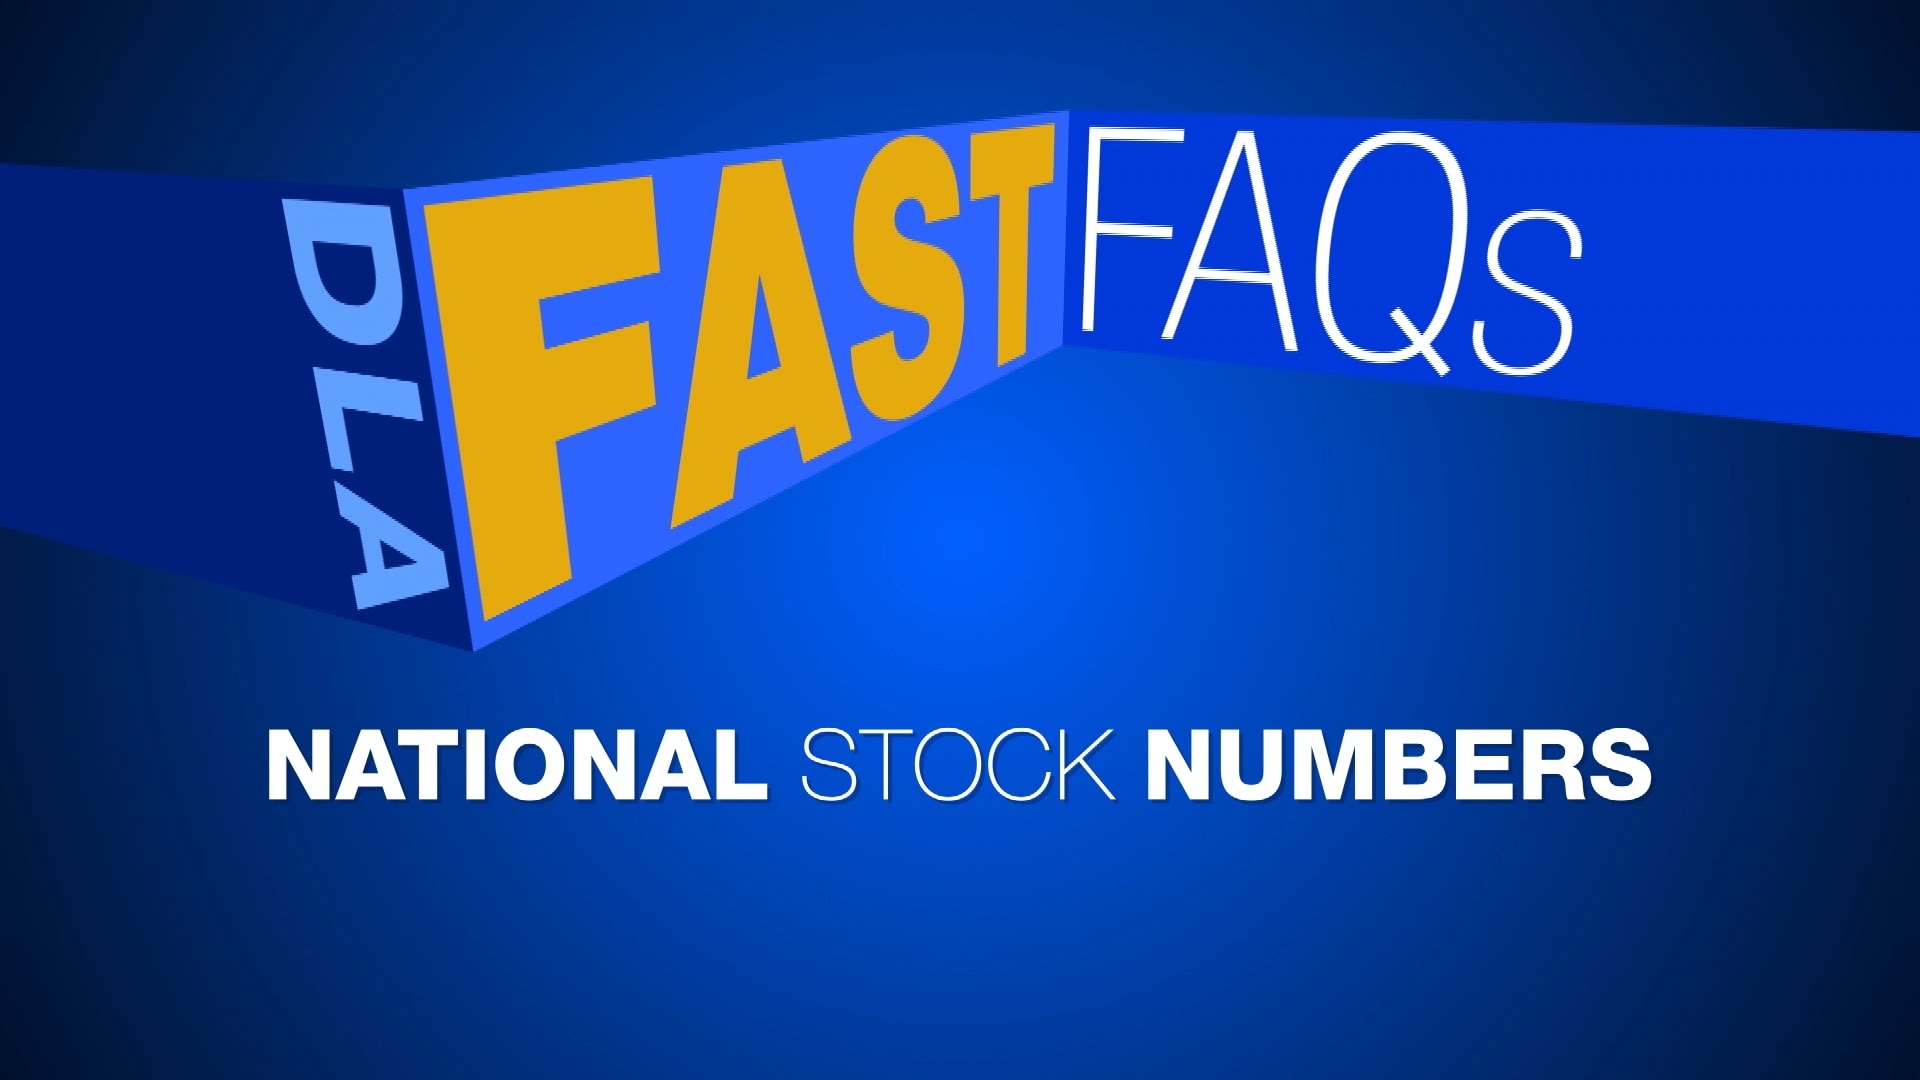 DLA fast FAQs National Stock Numbers graphic.